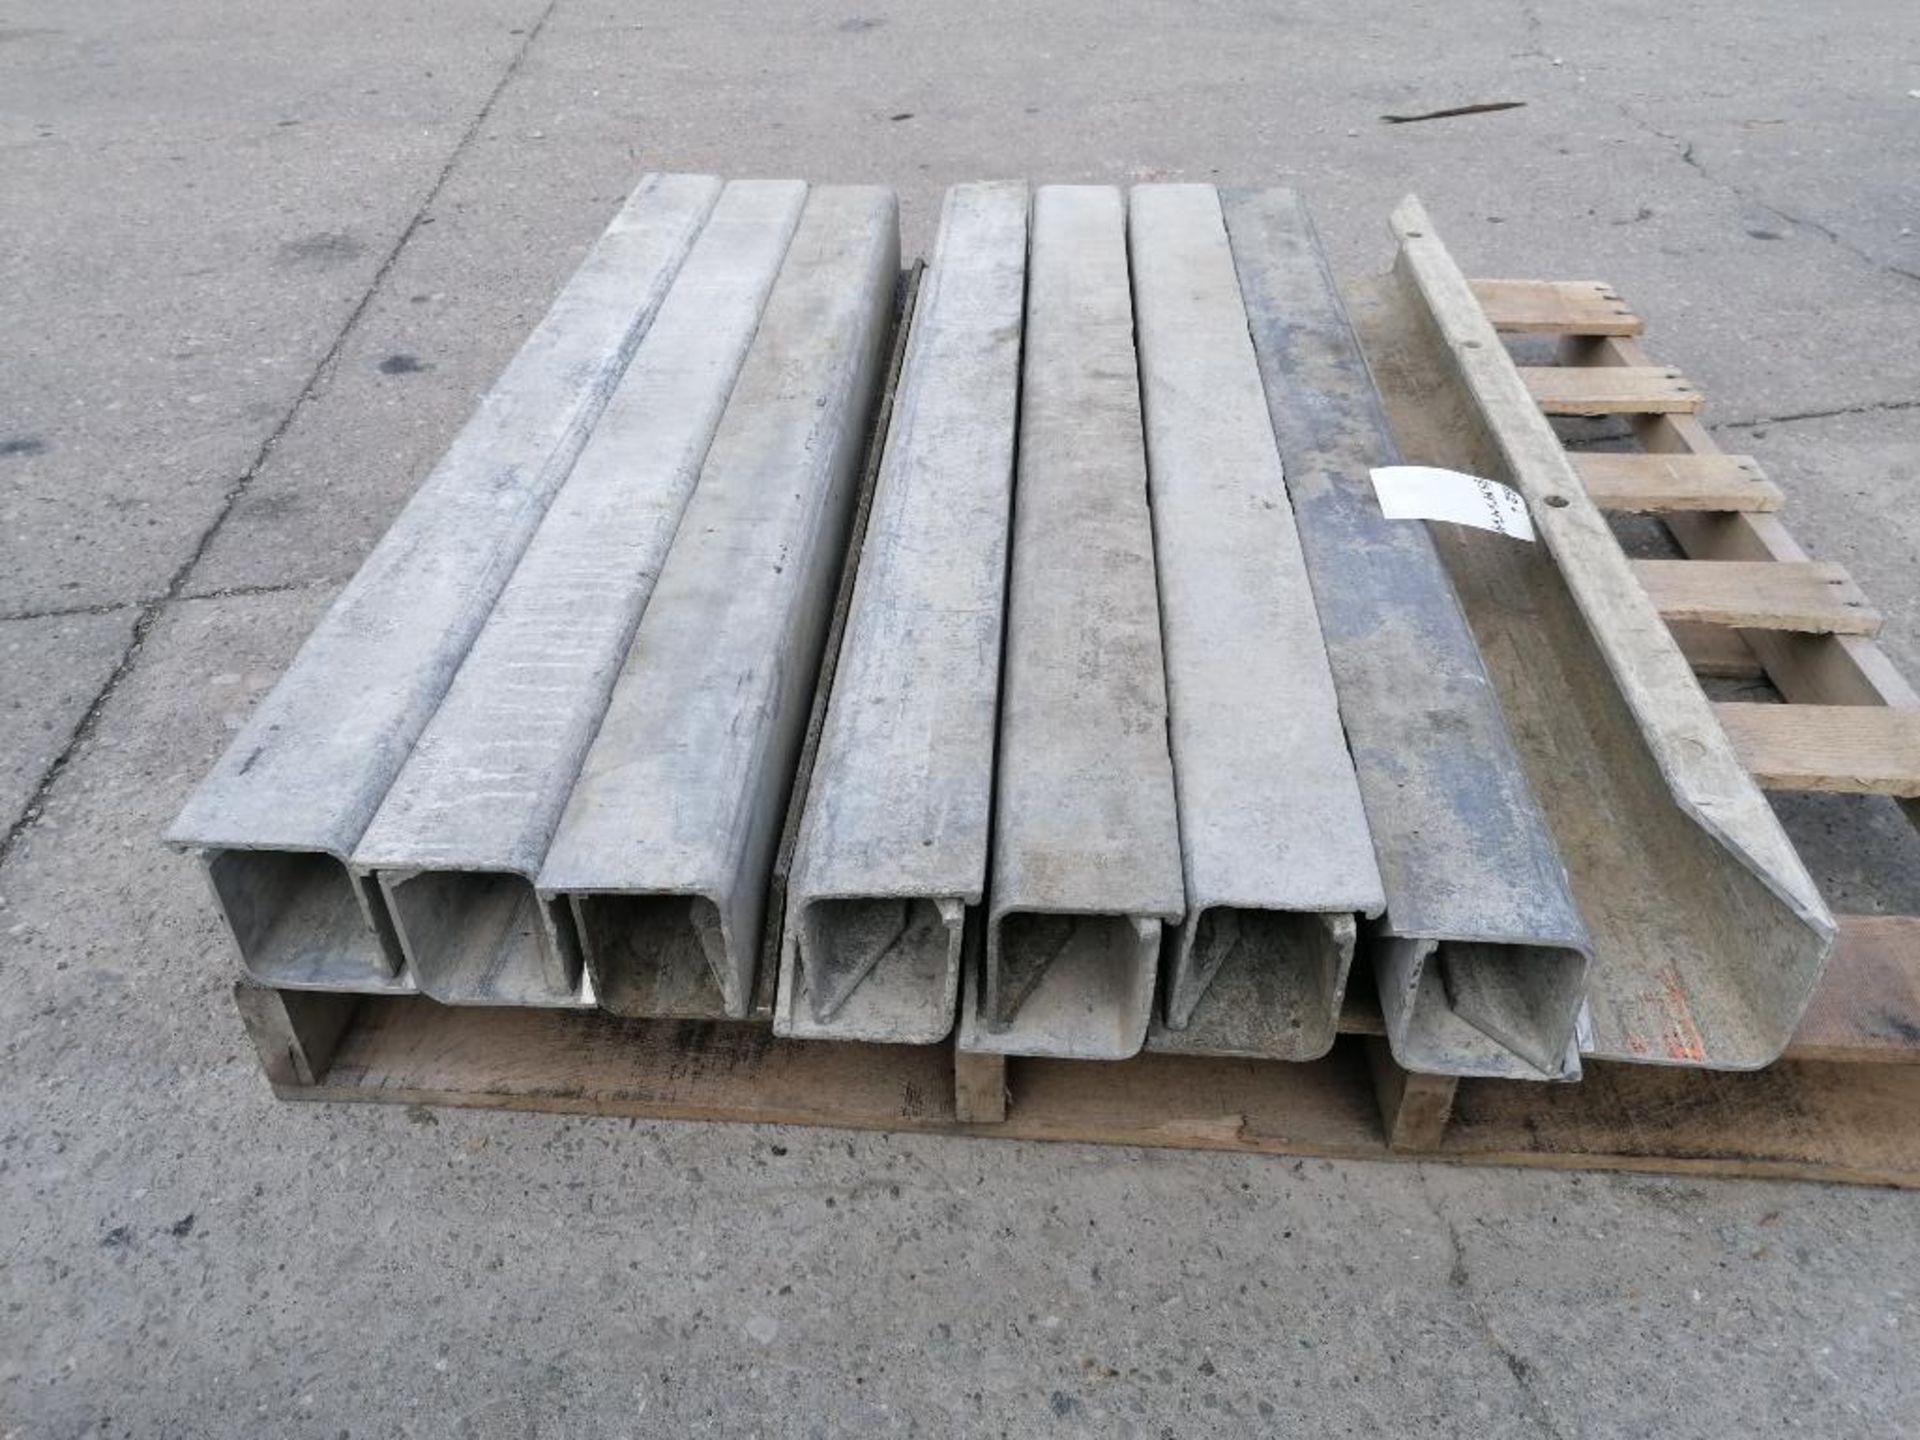 (15) 4" x 4" x 4' ISC Wall-Ties Smooth Aluminum Concrete Forms 6-12 Hole Pattern. Located in Mt.